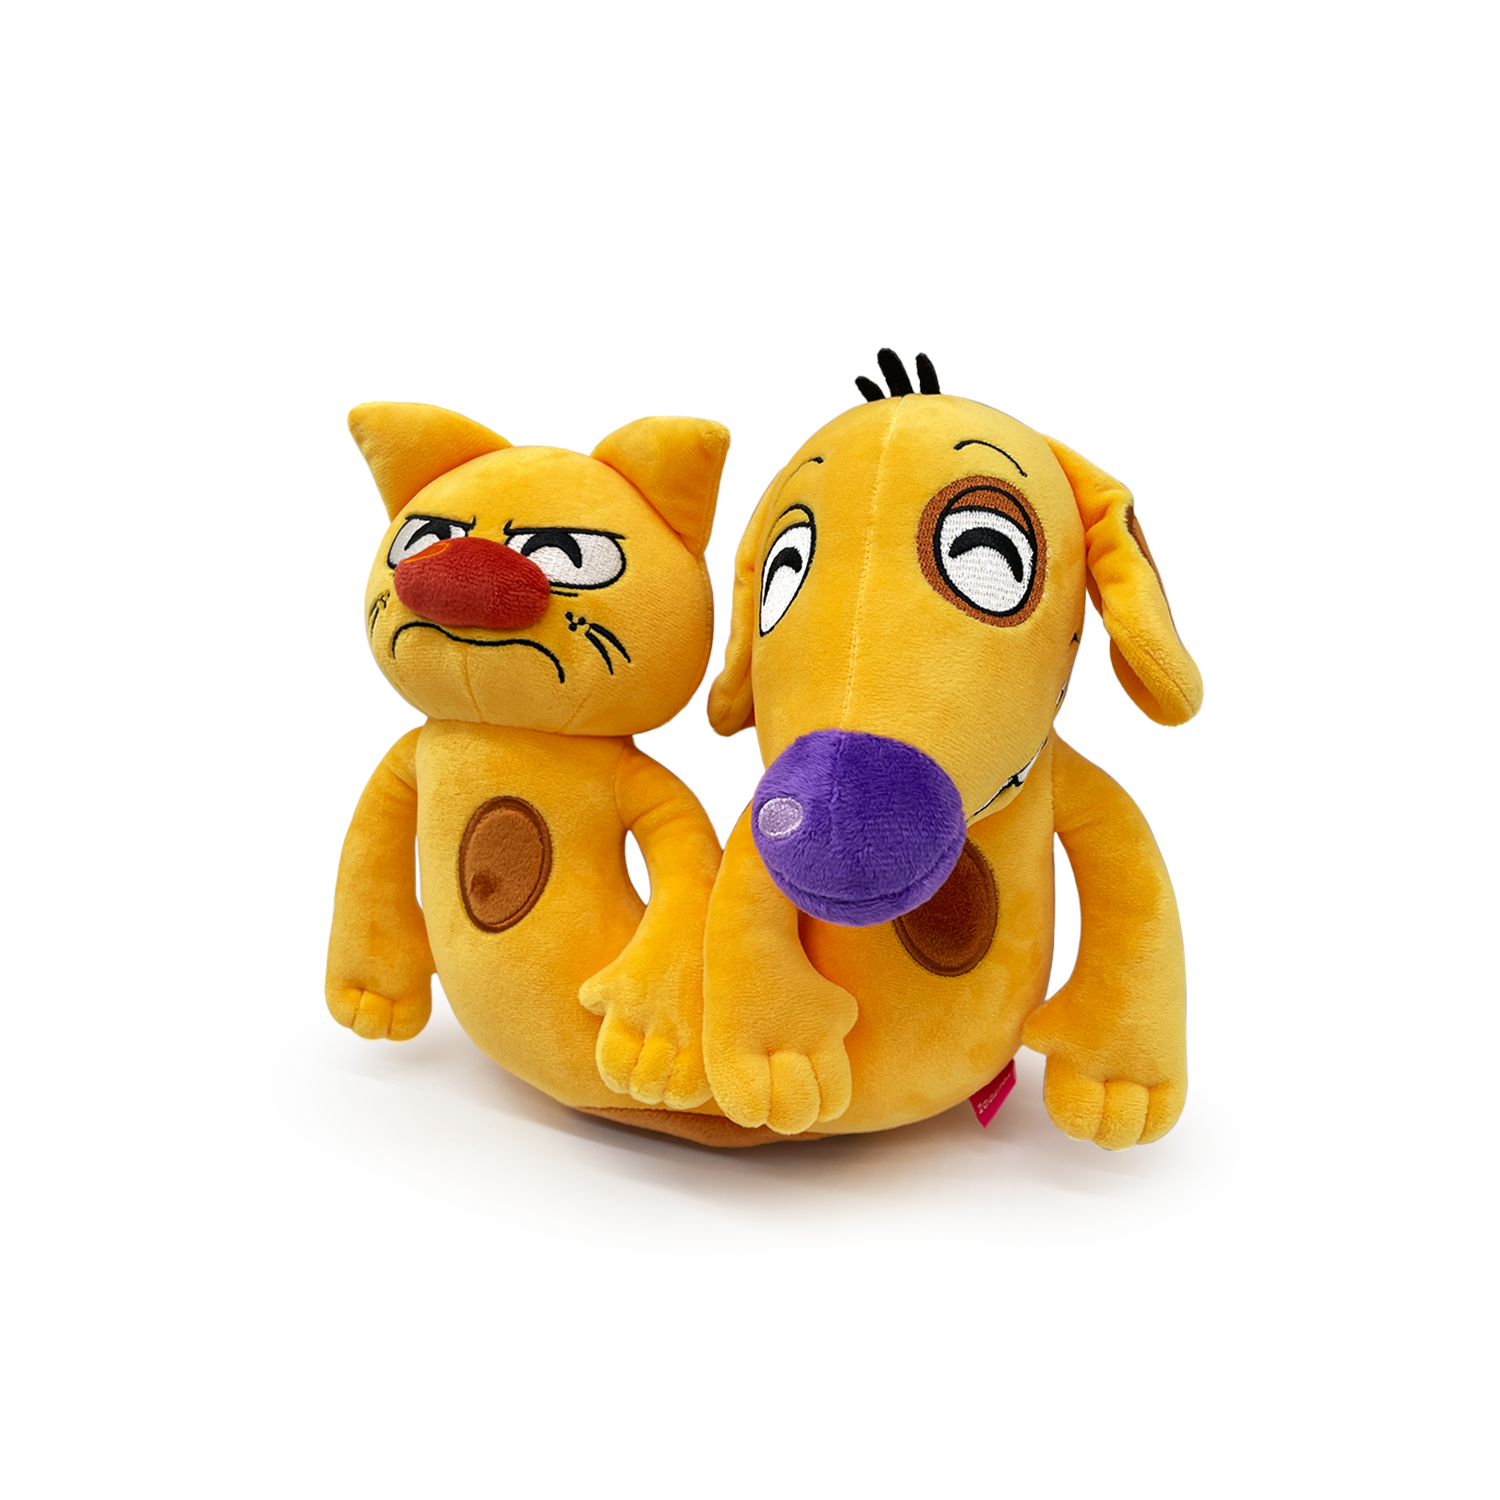 CatDog plush toys! I Want These Guys Cuz They're Also From That